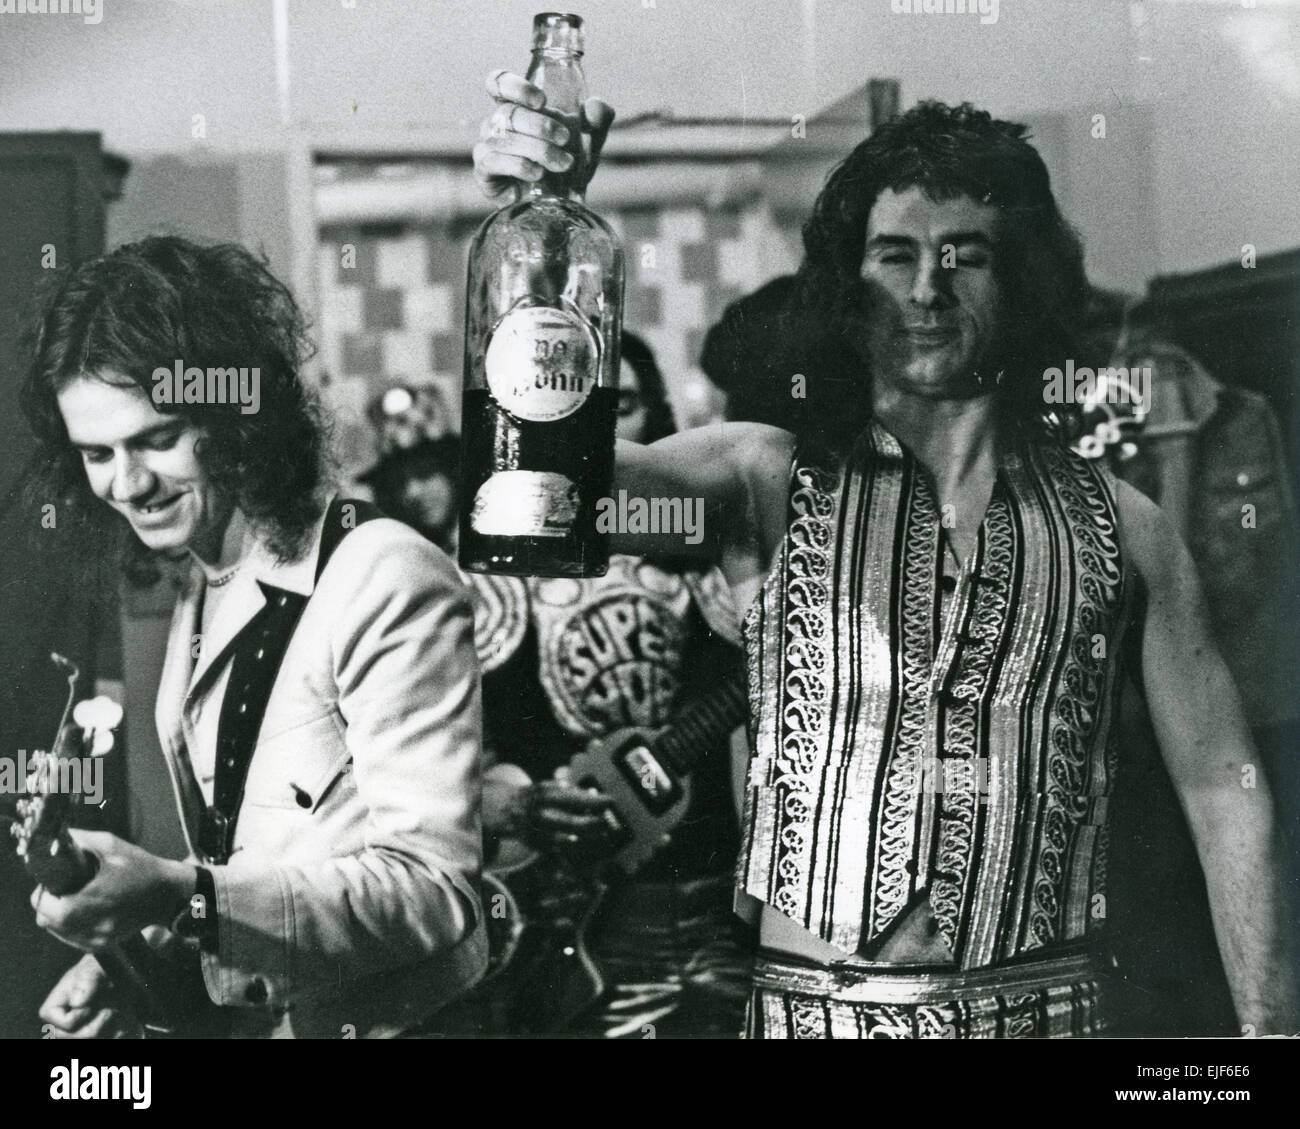 SLADE UK pop rock group in New York in 1973 with Jim Lea at left, Noddy Holder in background and Don Powell with the bottle Stock Photo